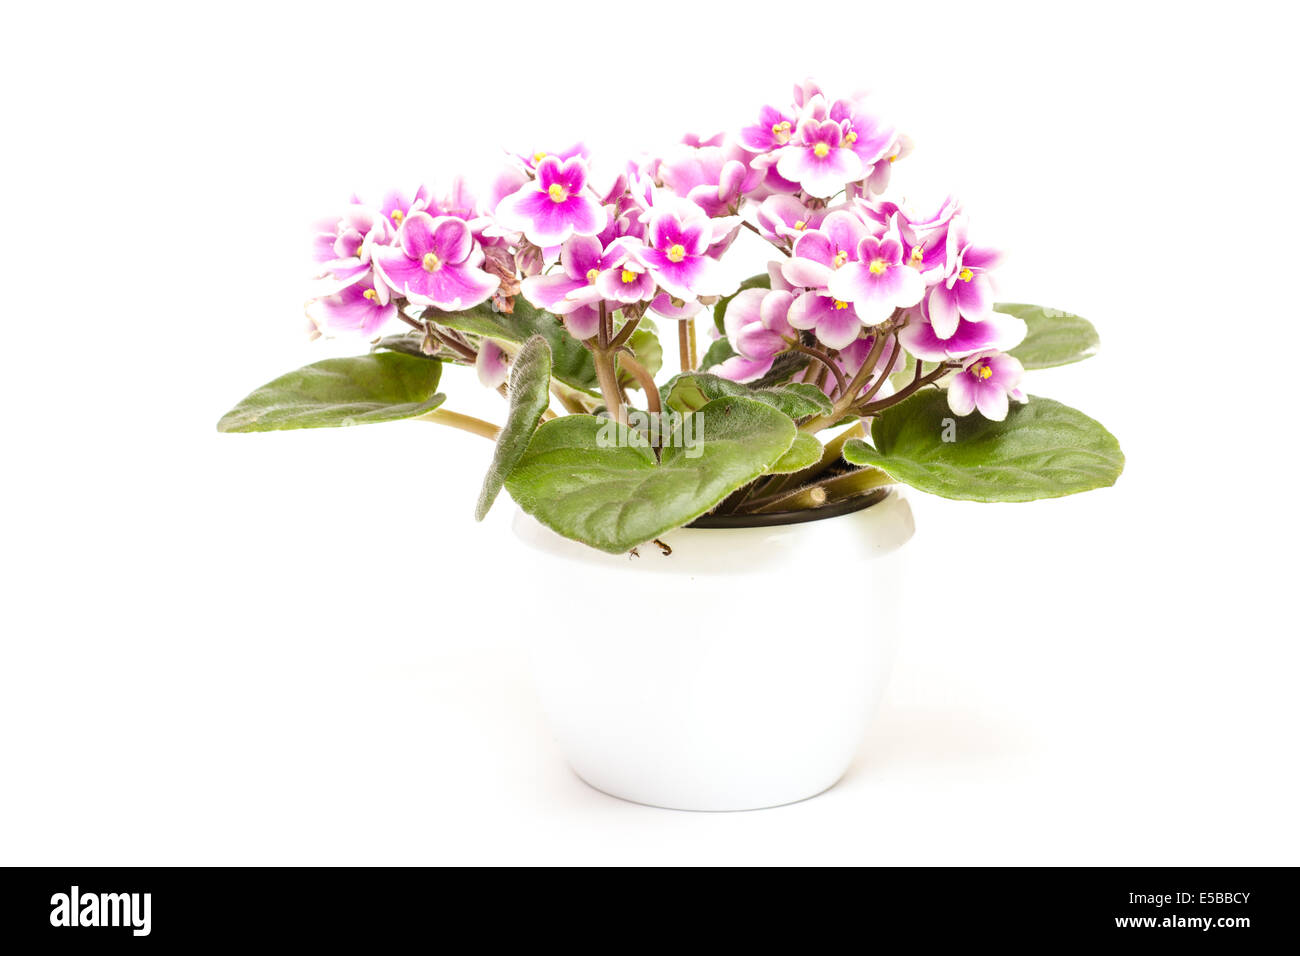 Bicolored african violet on white background Stock Photo